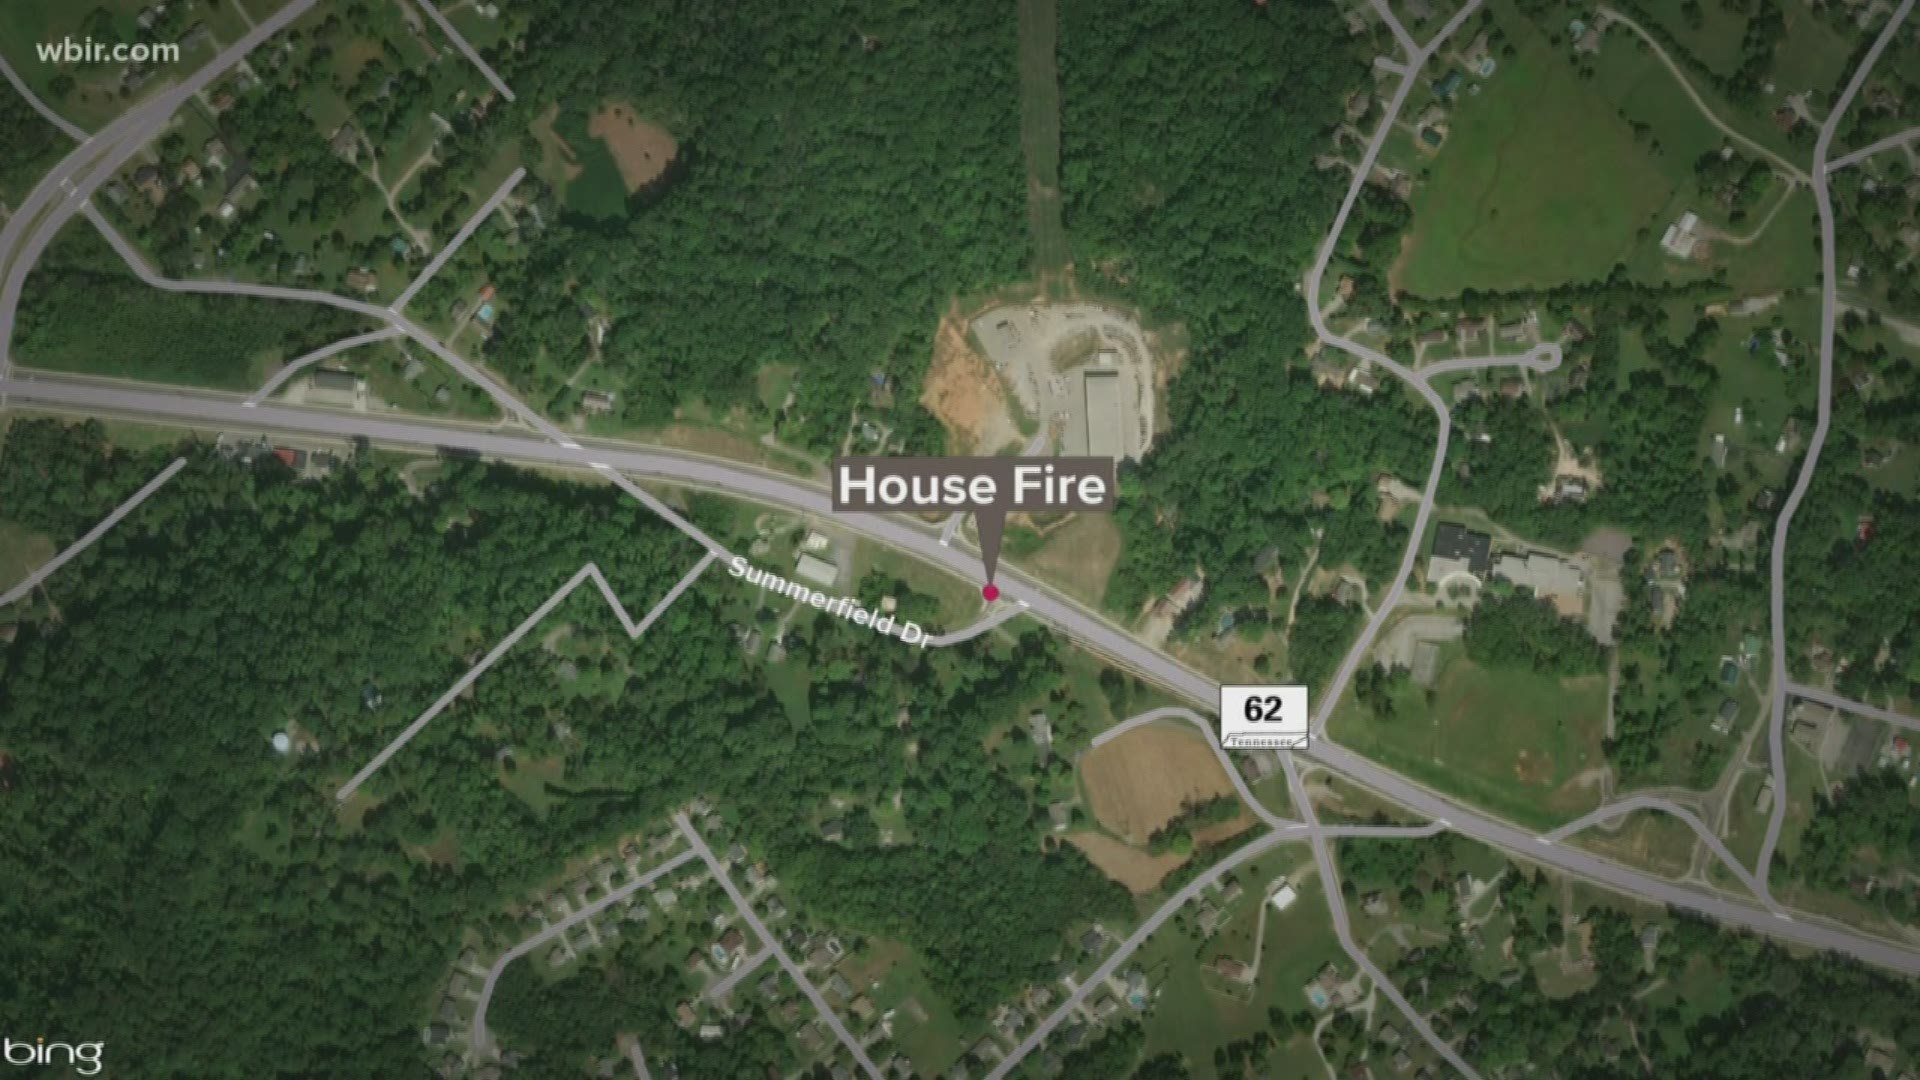 The Karns Fire Department said one person was taken to the hospital after a house fire at the 6500-block of Summerfield Drive early Sunday morning.